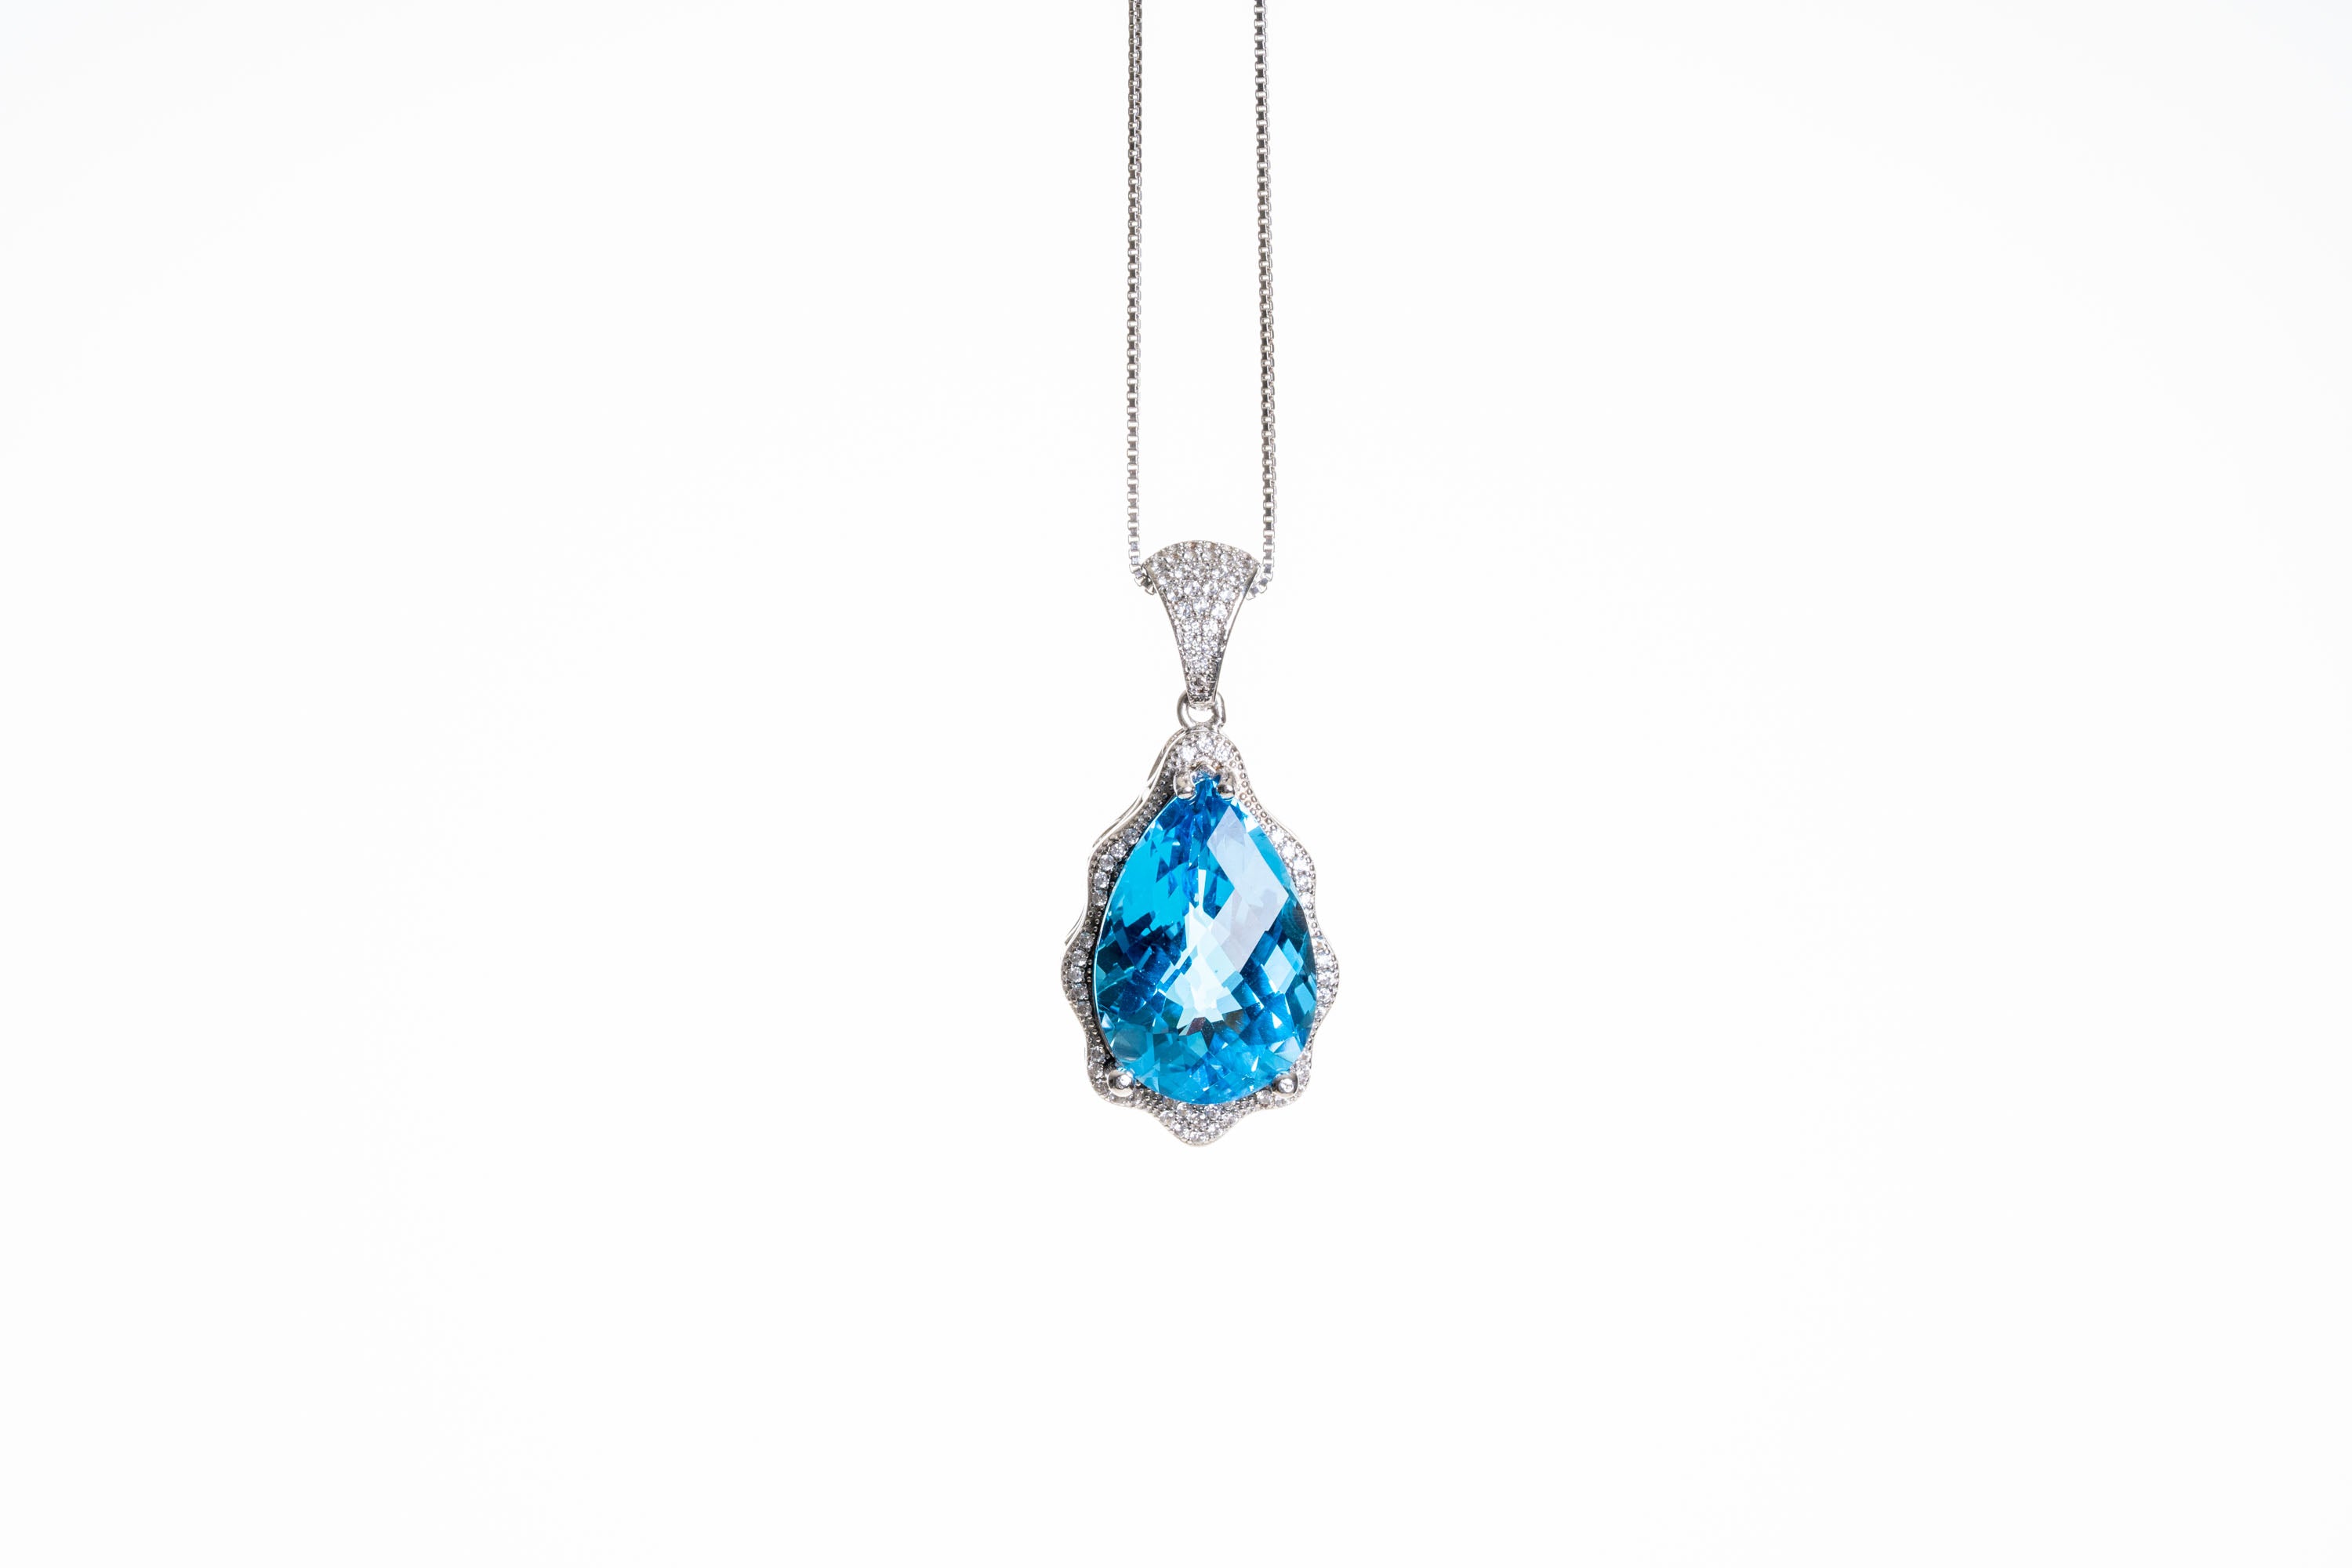 Blue Topaz Faceted Sterling Silver Pendant.